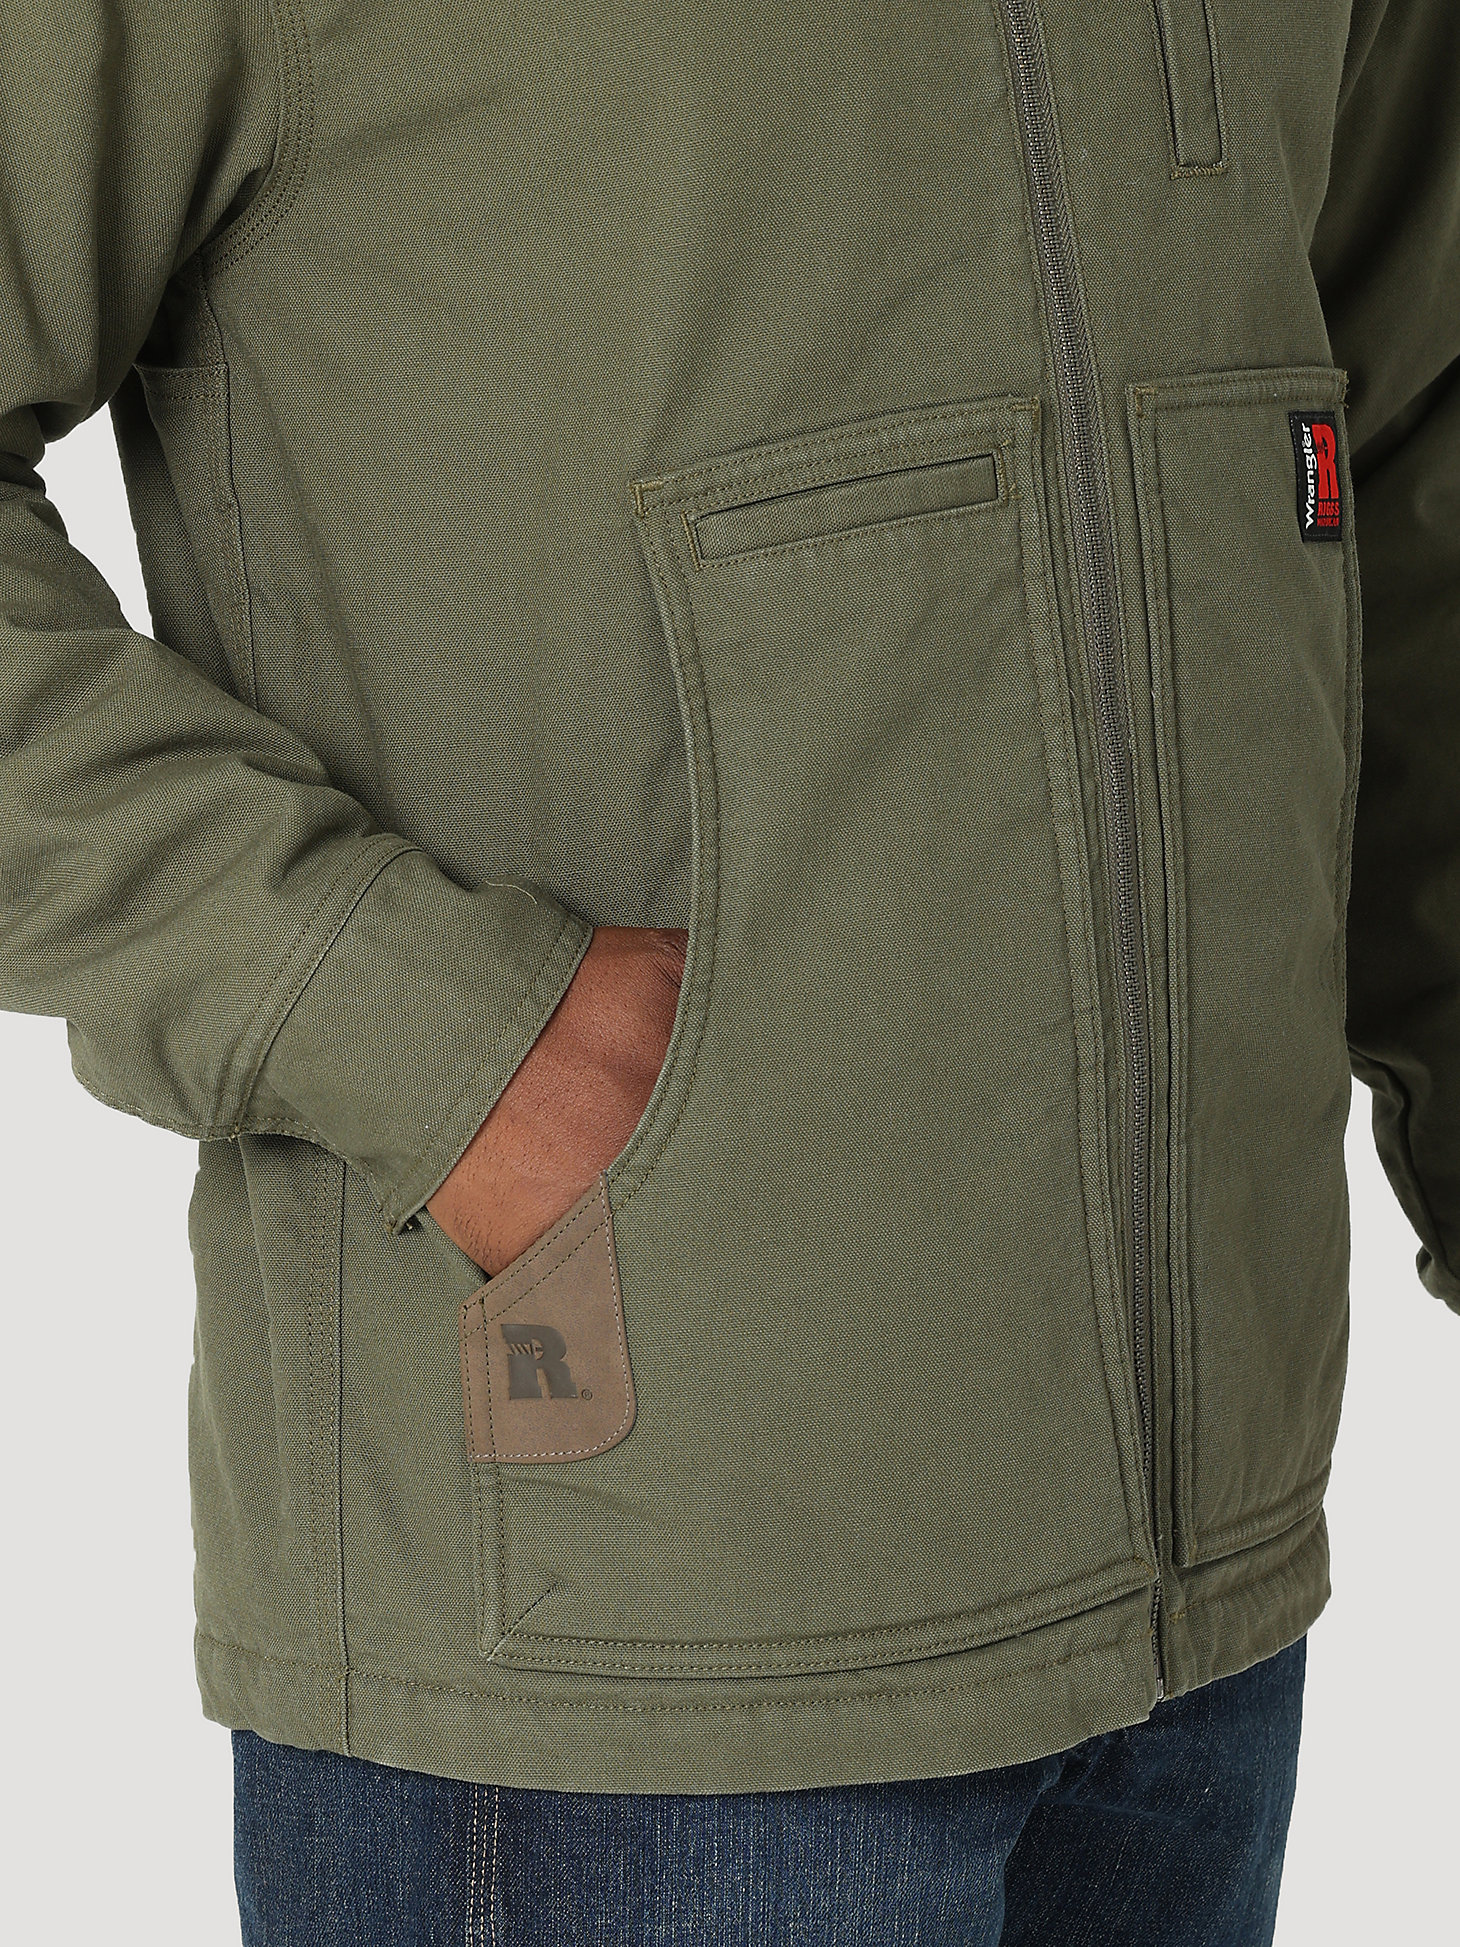 RIGGS Tough Layers Sherpa Lined Canvas Jacket in Loden alternative view 5